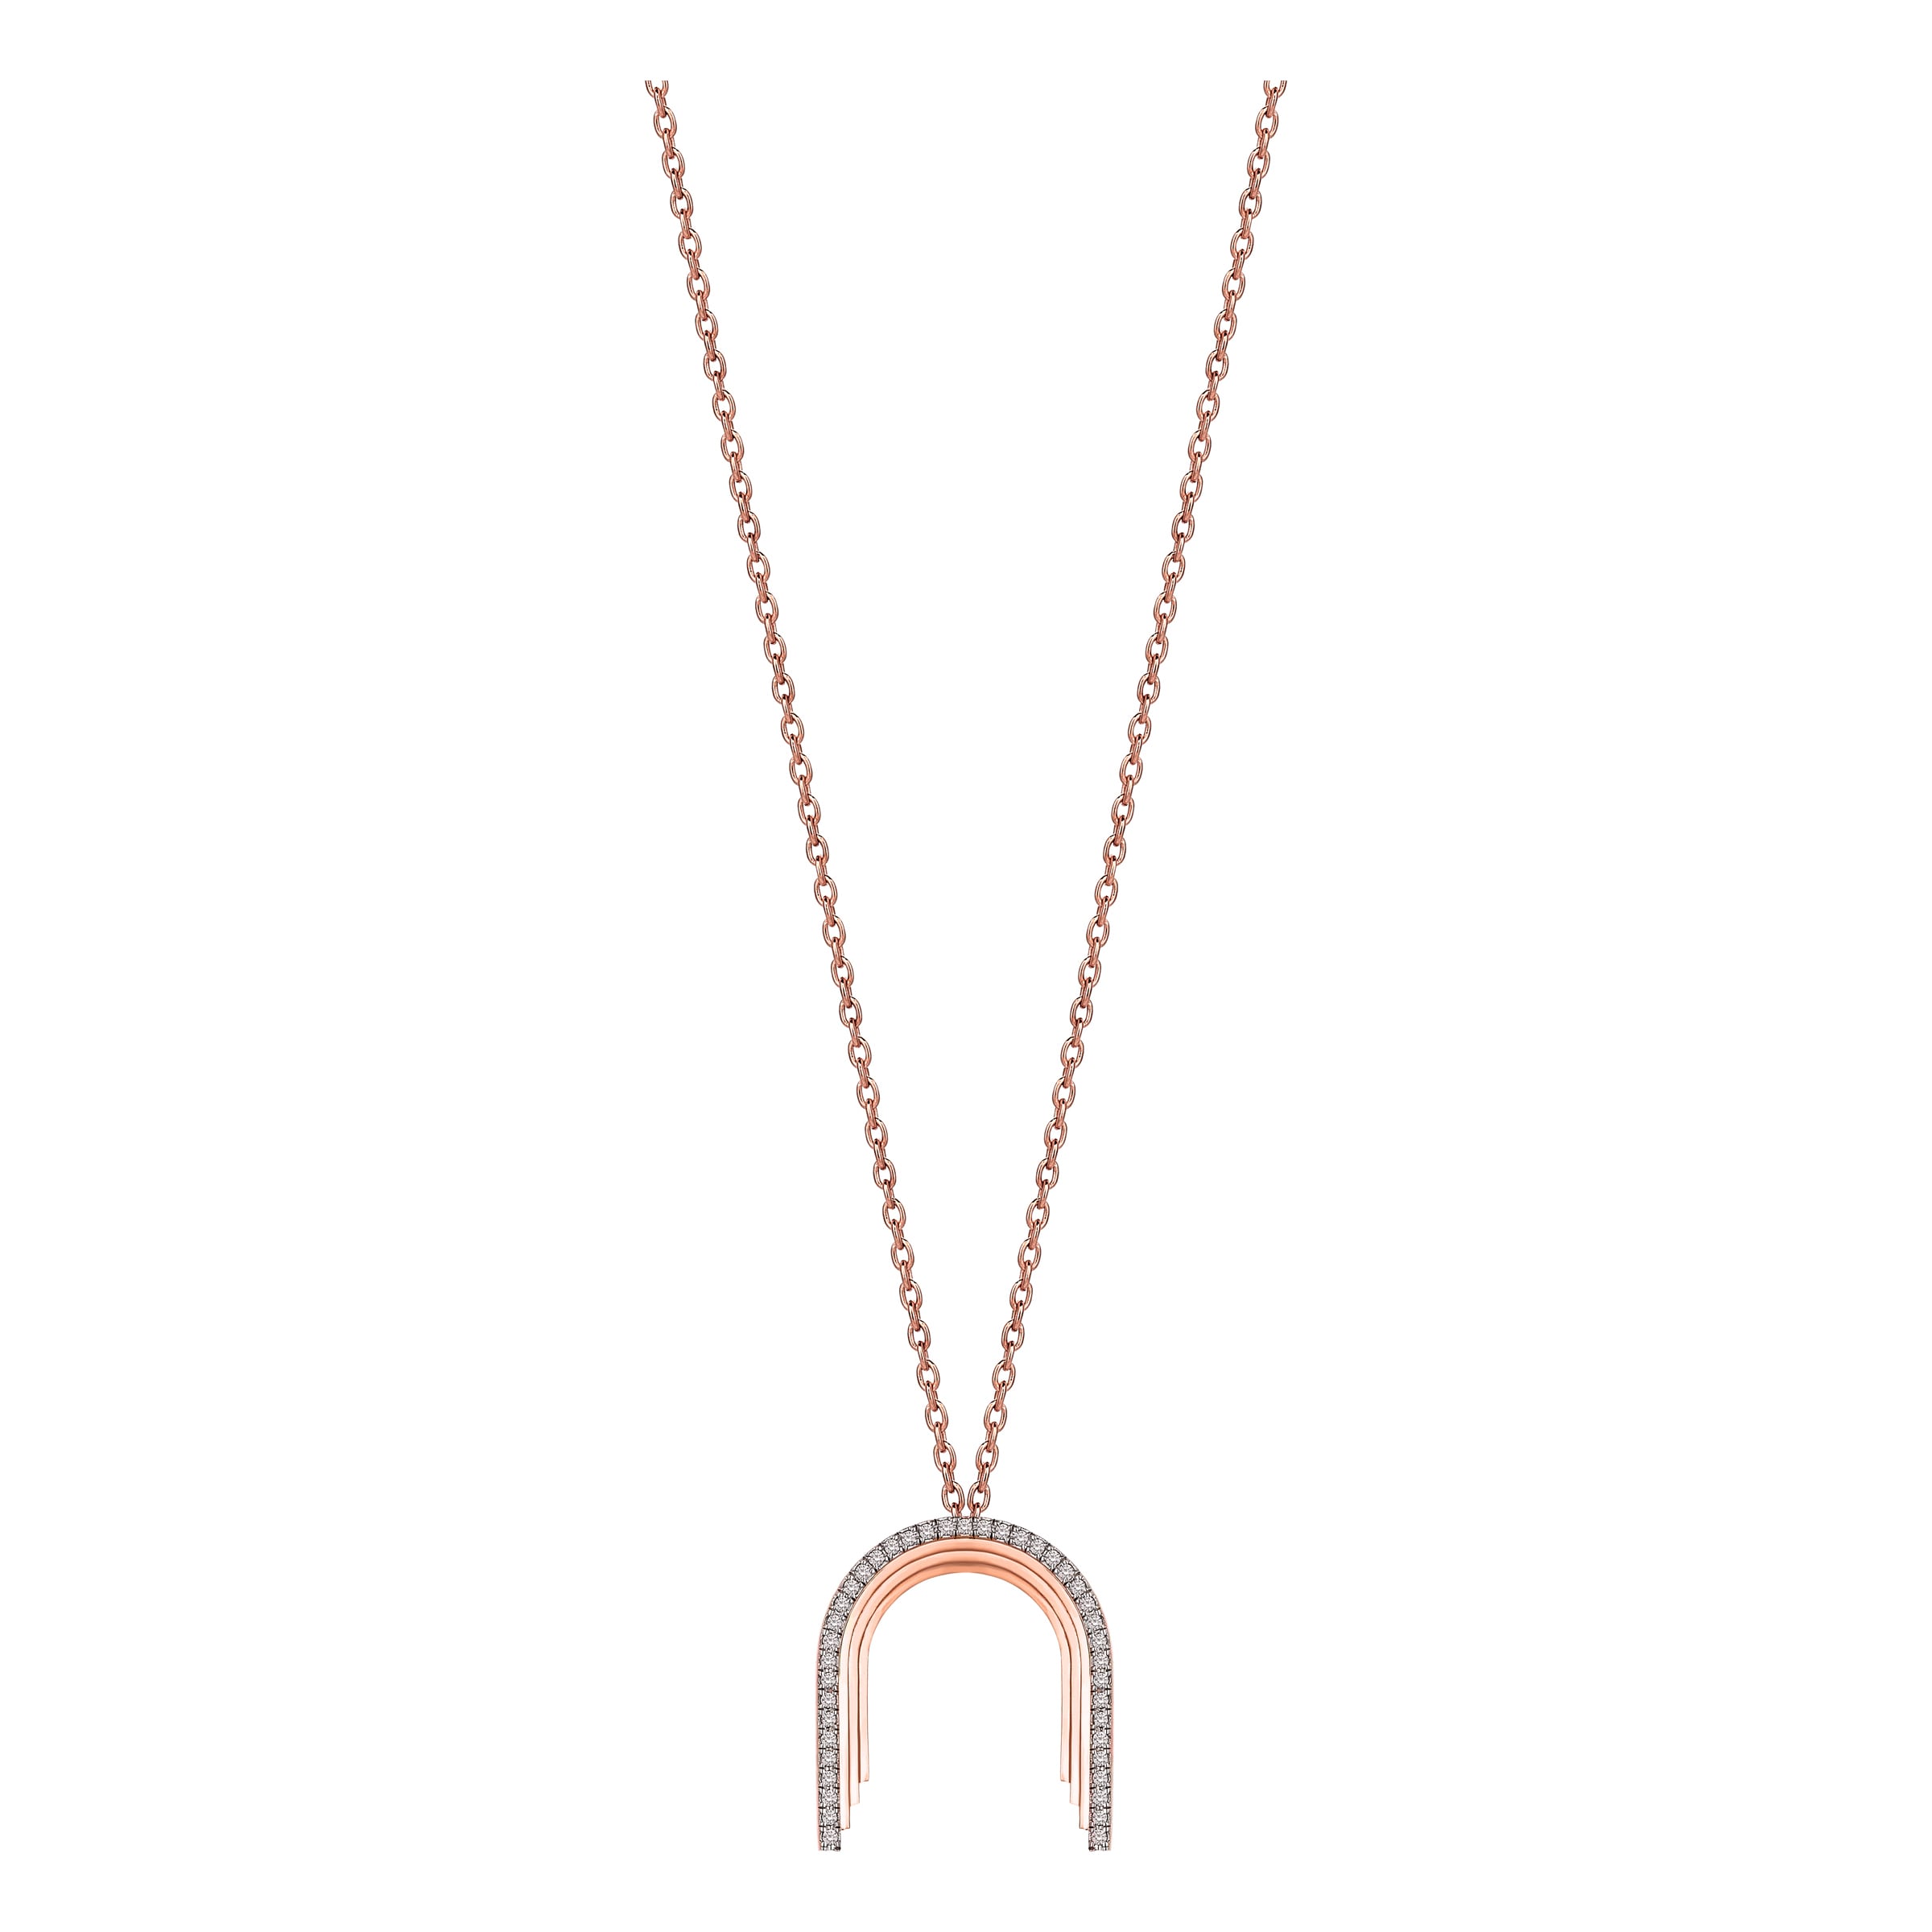 Convex Mini Arch Necklace in Rose Gold - Her Story Shop